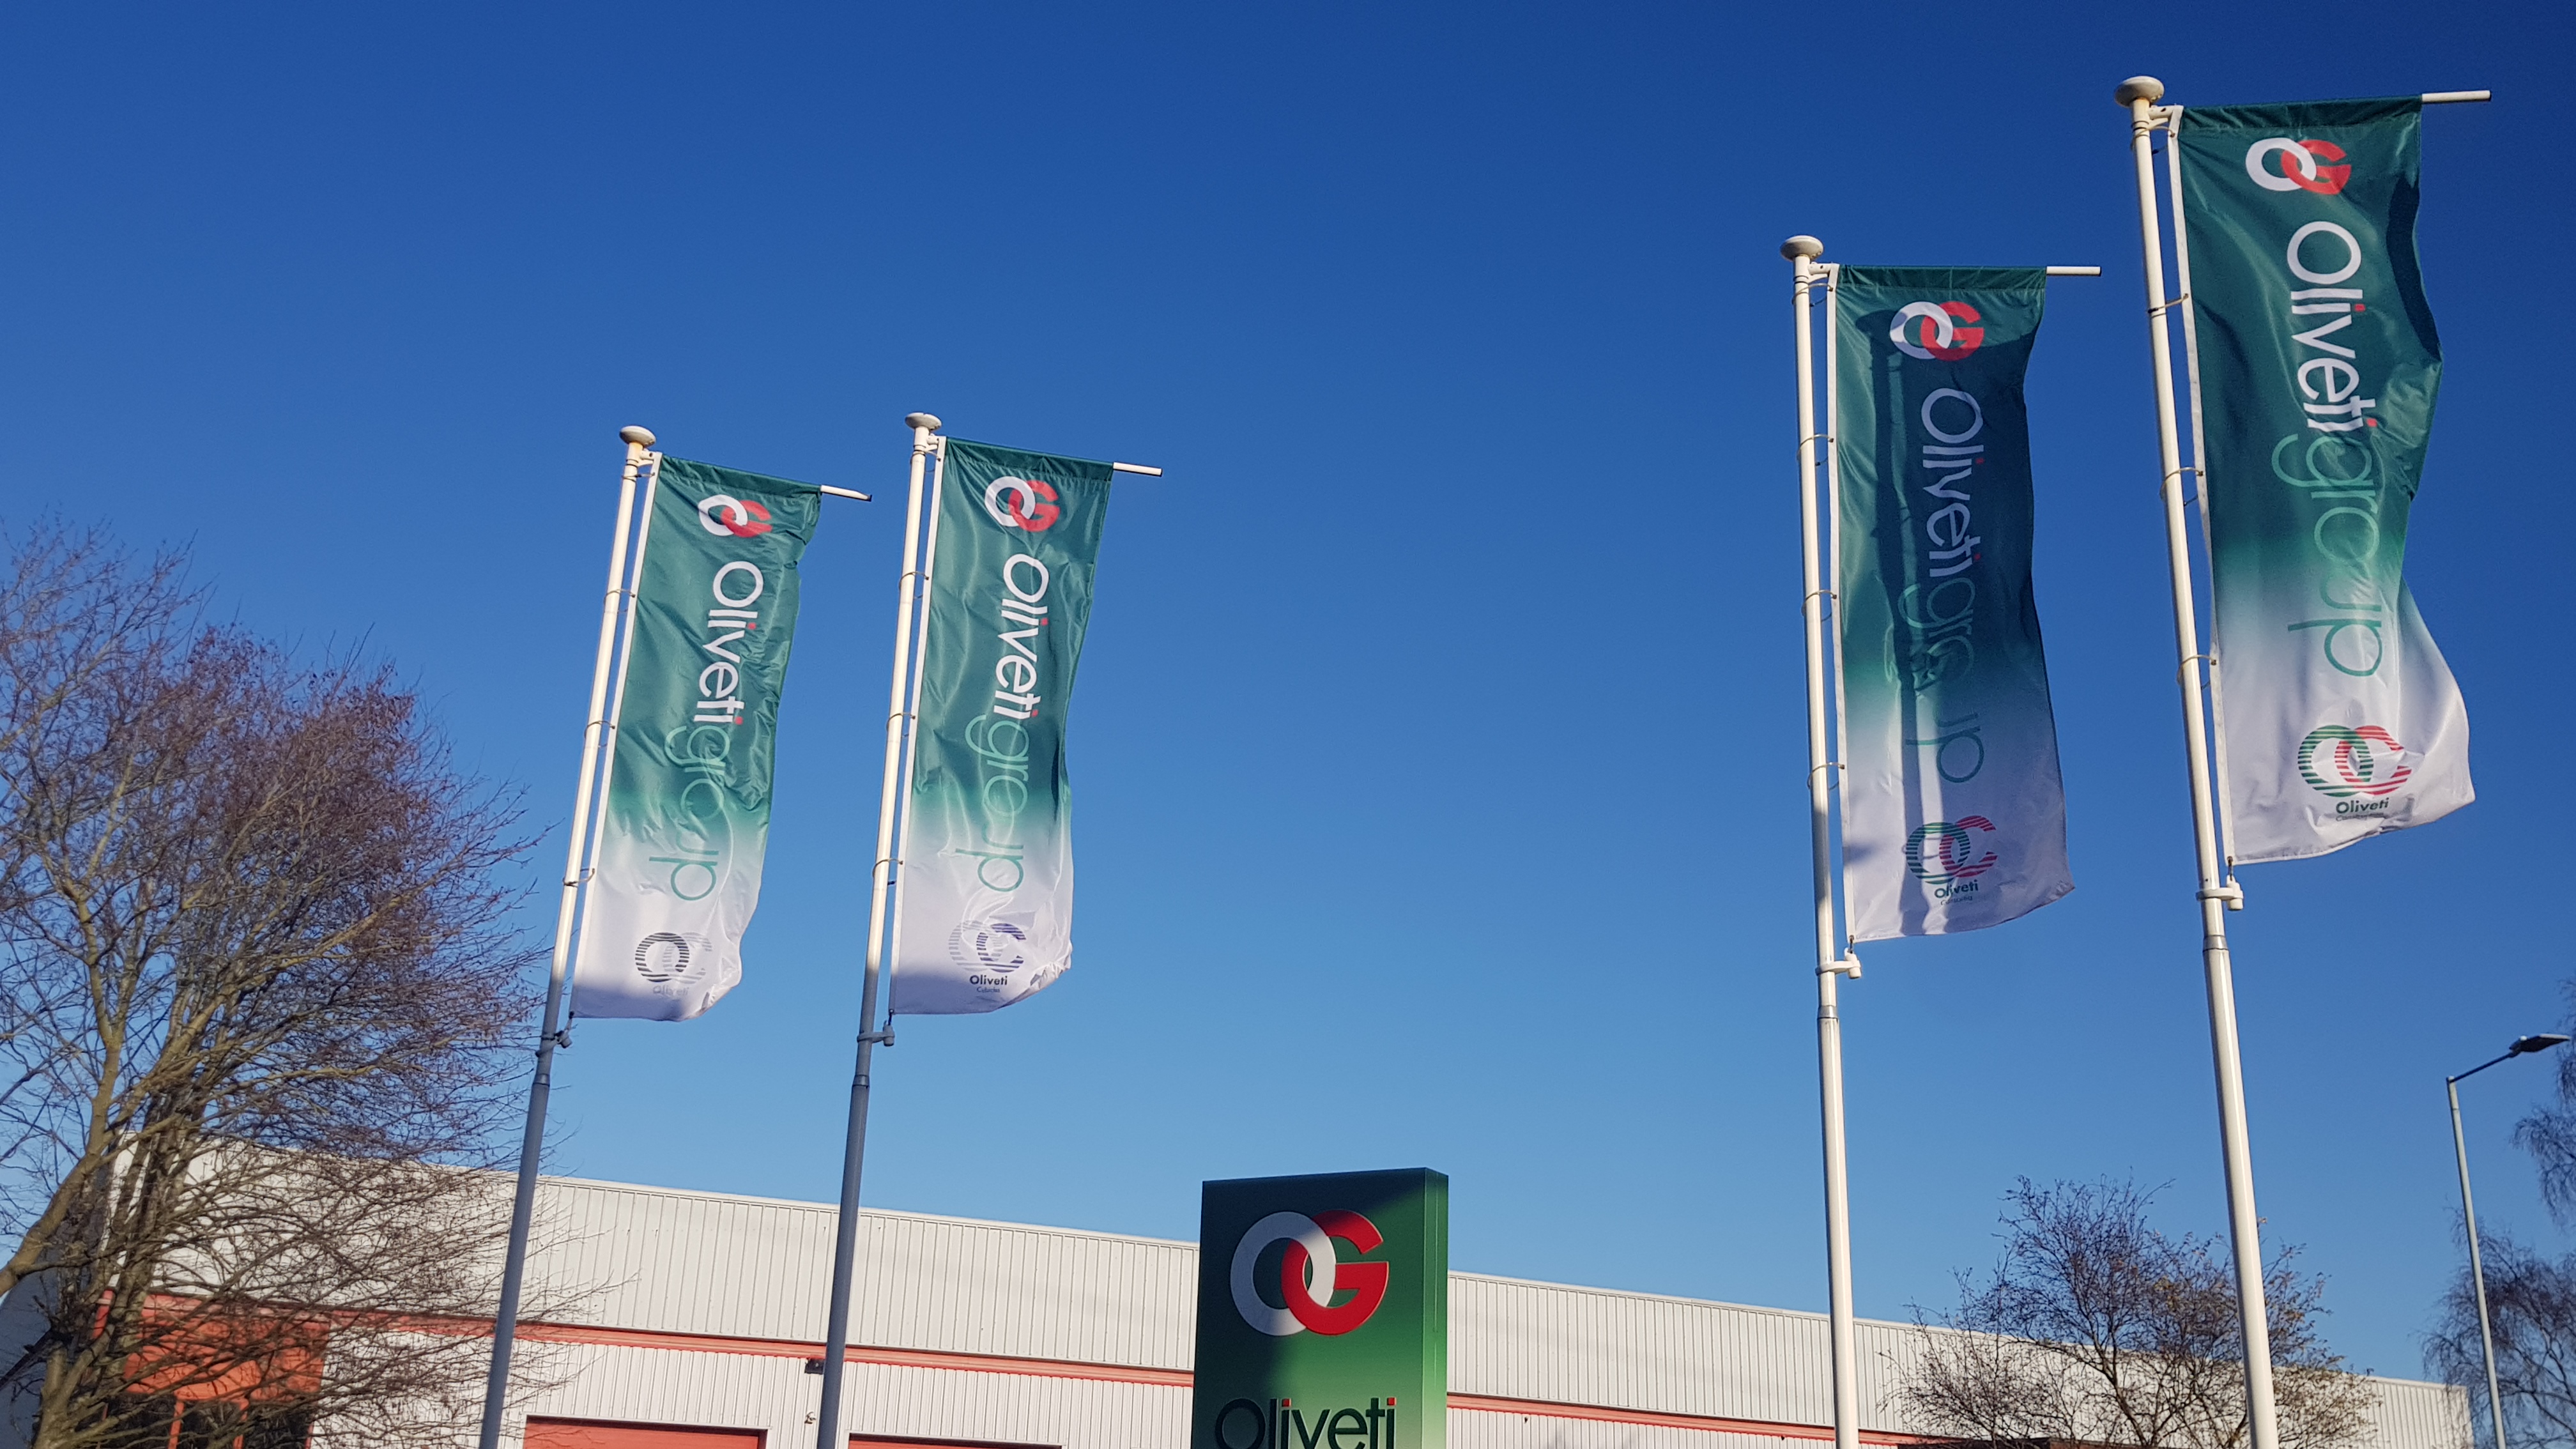 Oliveti Group flags